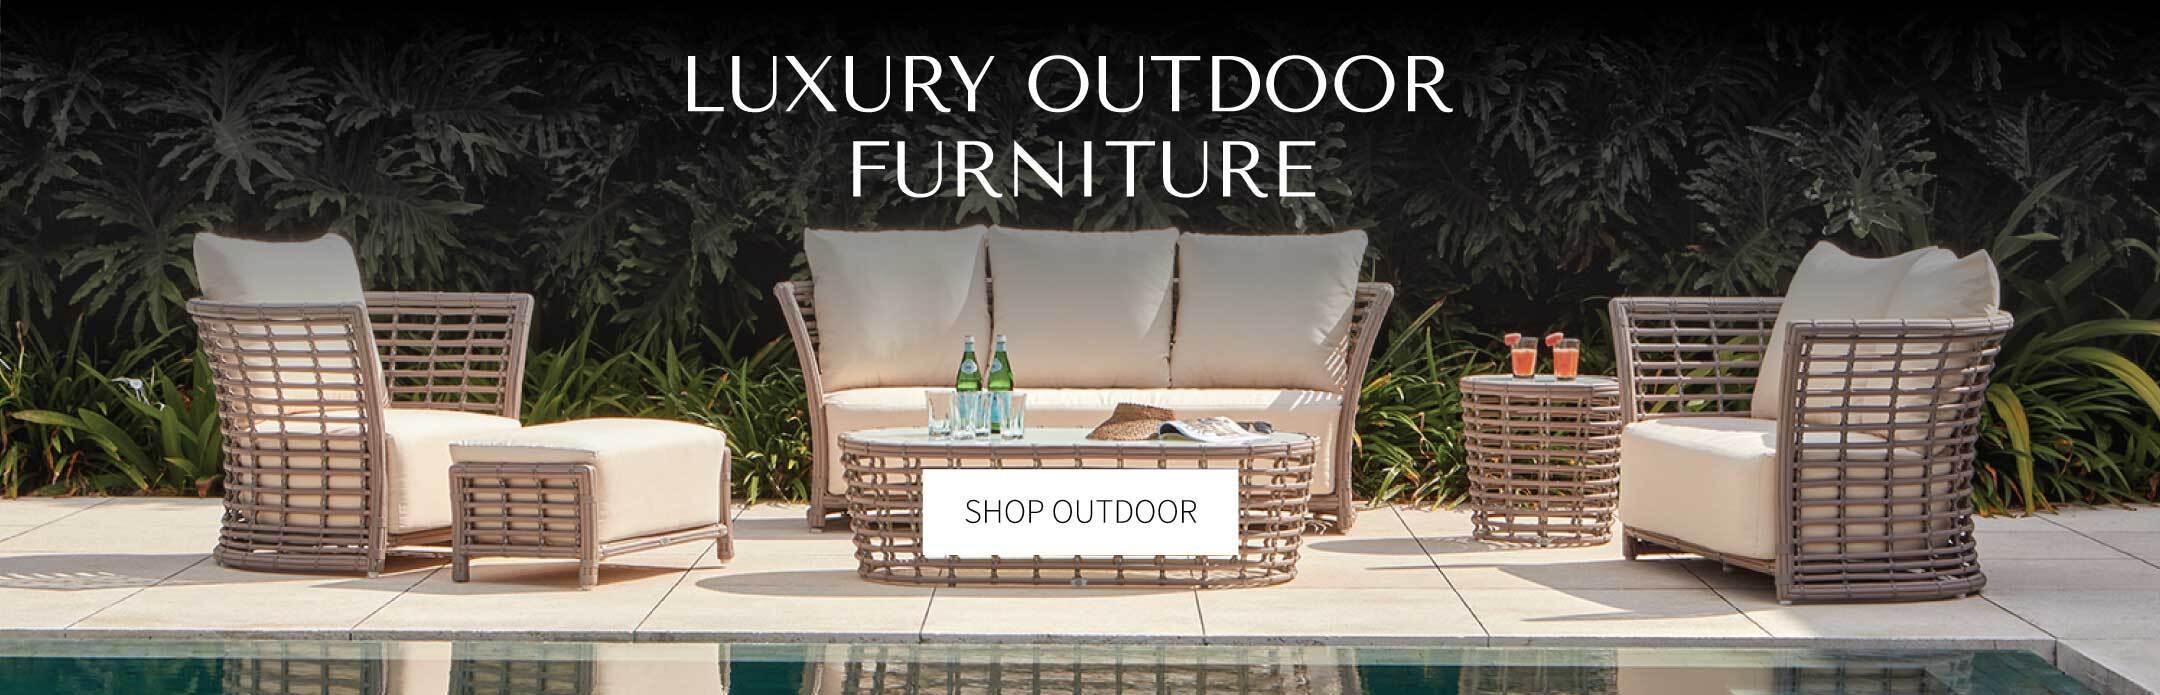 Unlimited Furniture | Home of Luxury Furniture and Interior Design